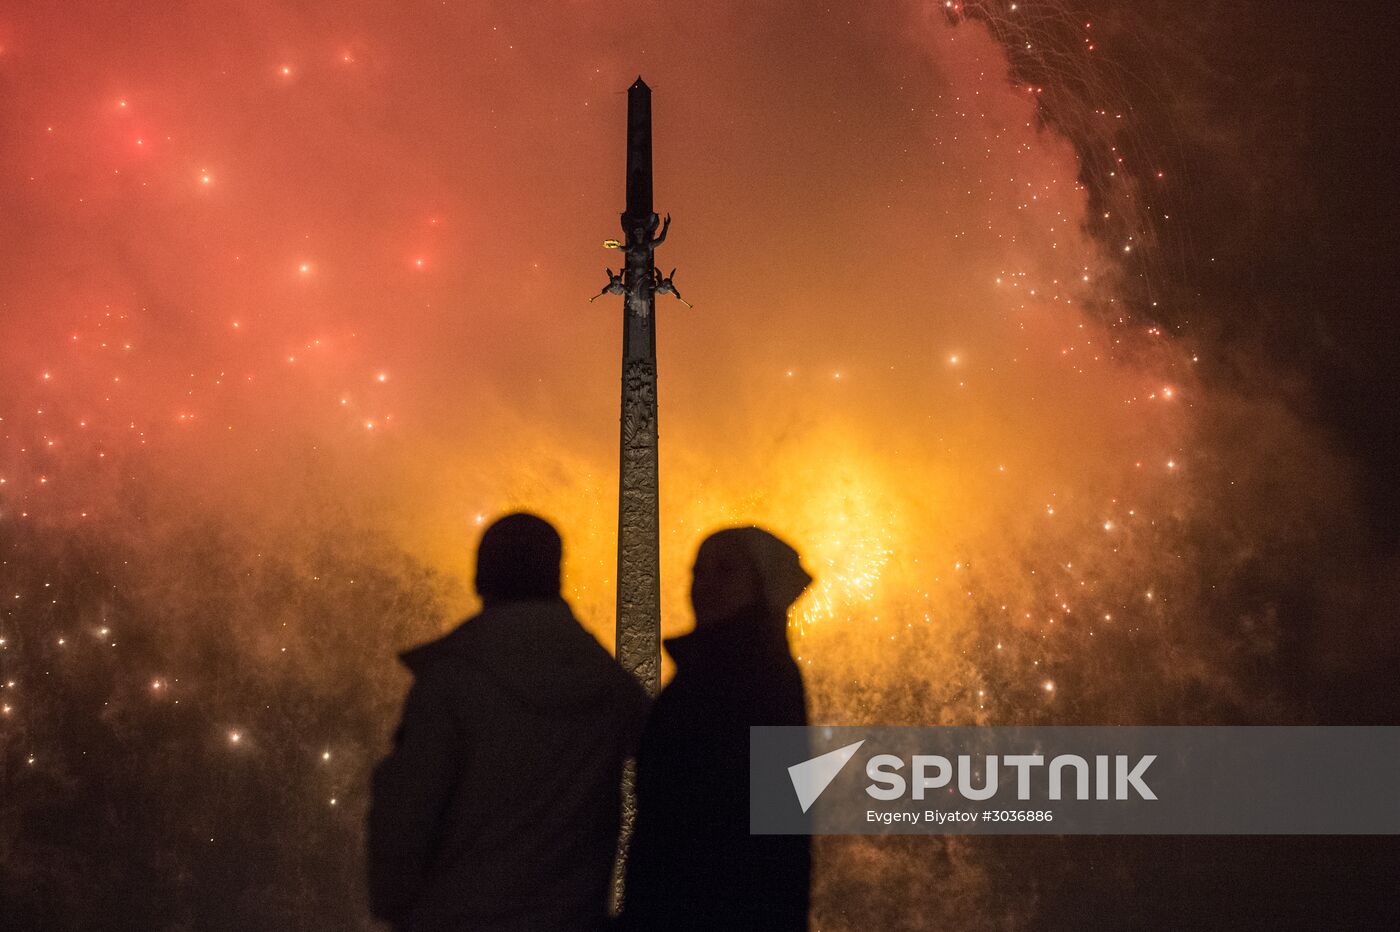 Defender of the Fatherland Day fireworks